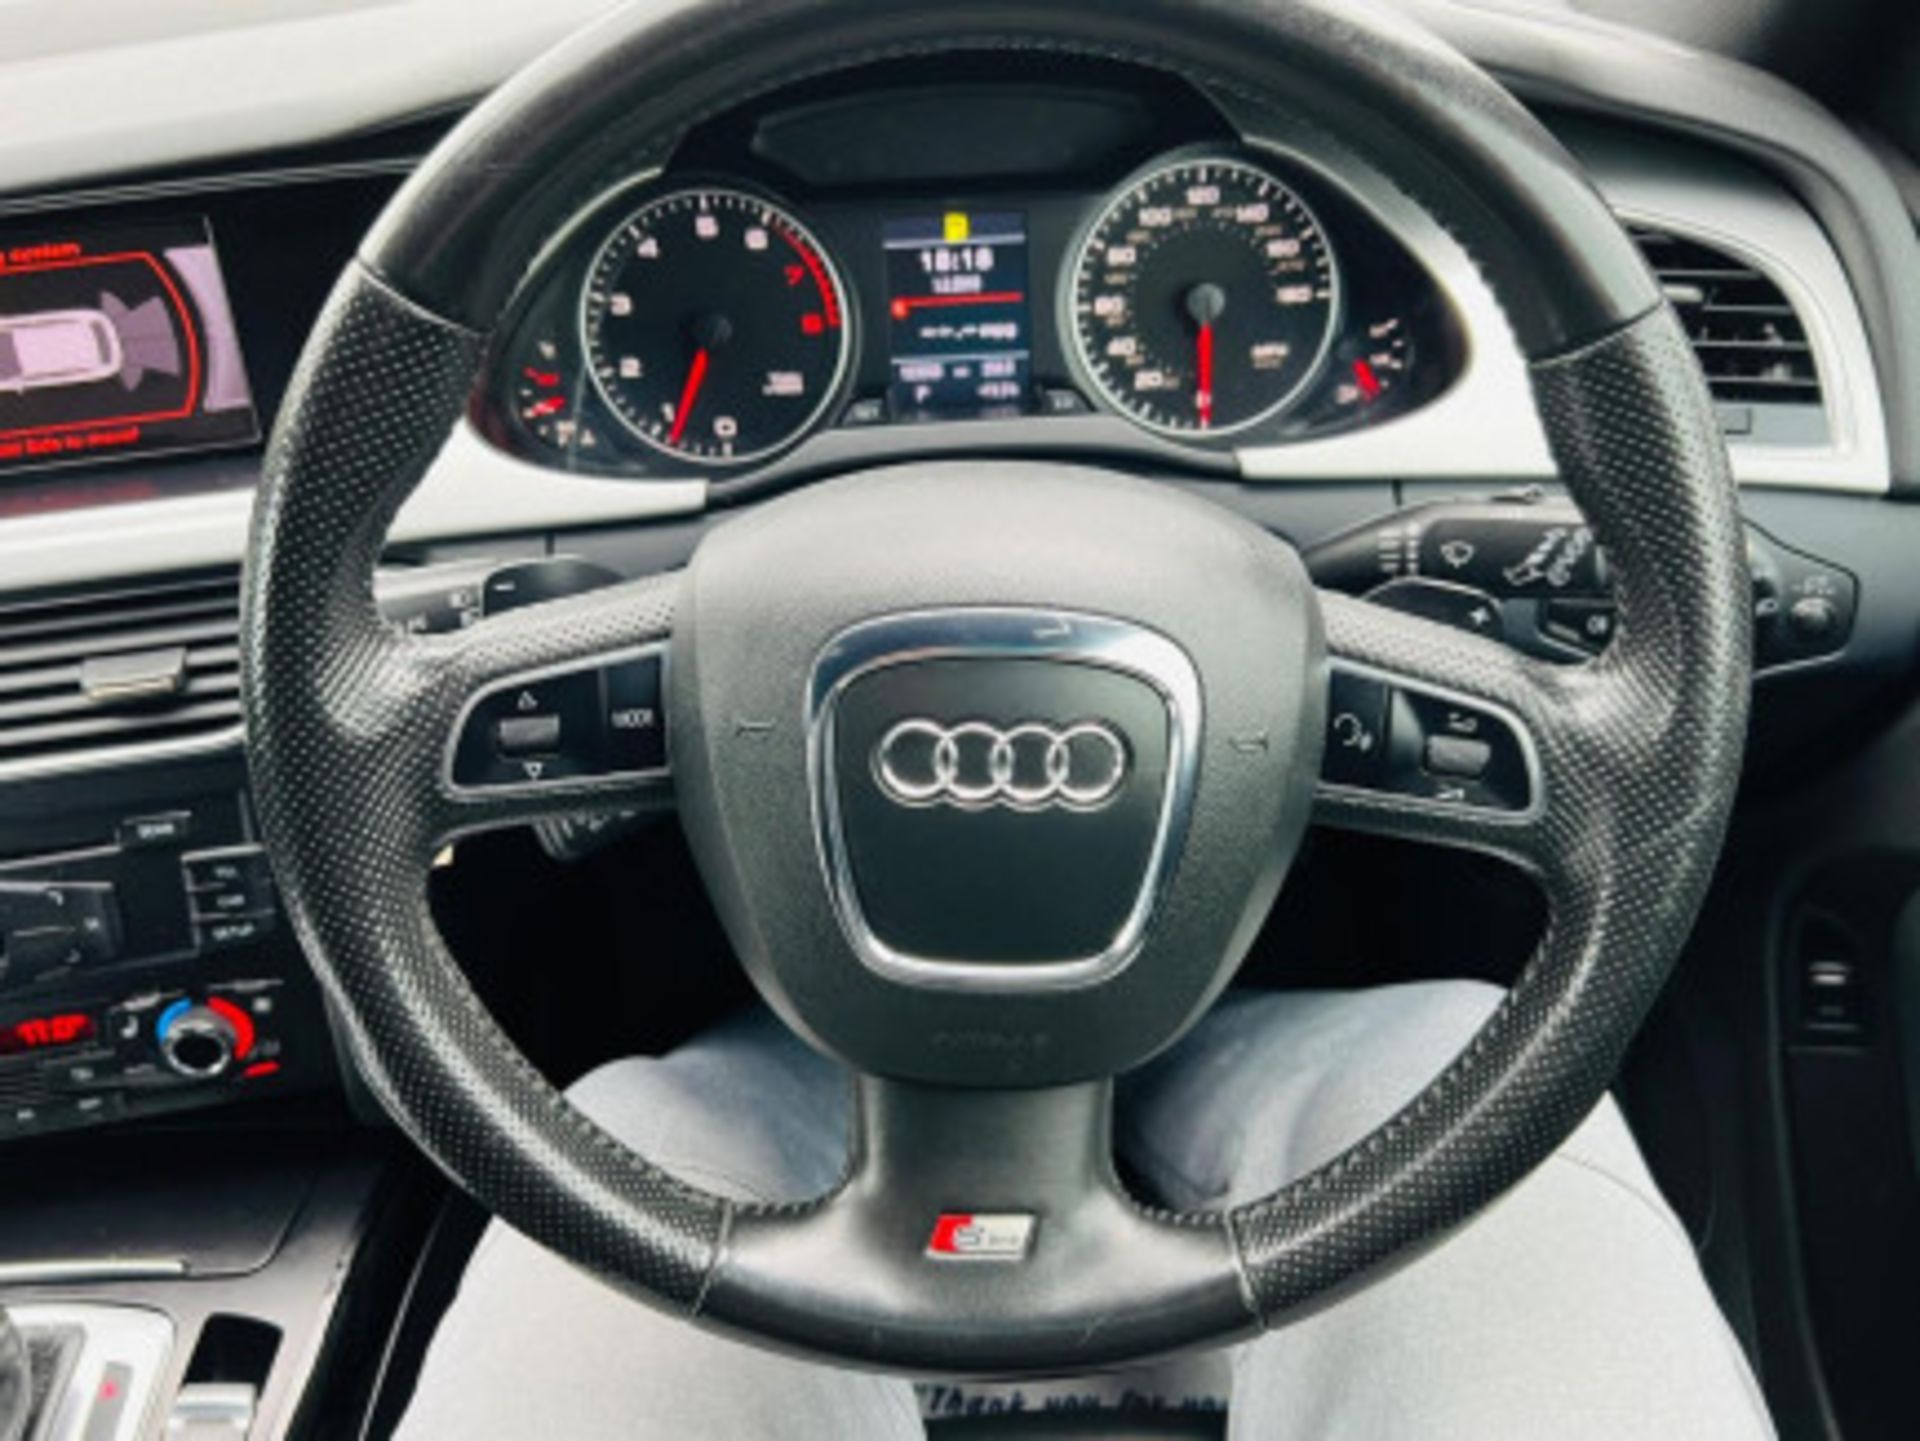 2010 AUDI A4 AVANT 2.0 TFSI S LINE SPECIAL EDITION S TRONIC QUATTRO >>--NO VAT ON HAMMER--<< - Image 14 of 115